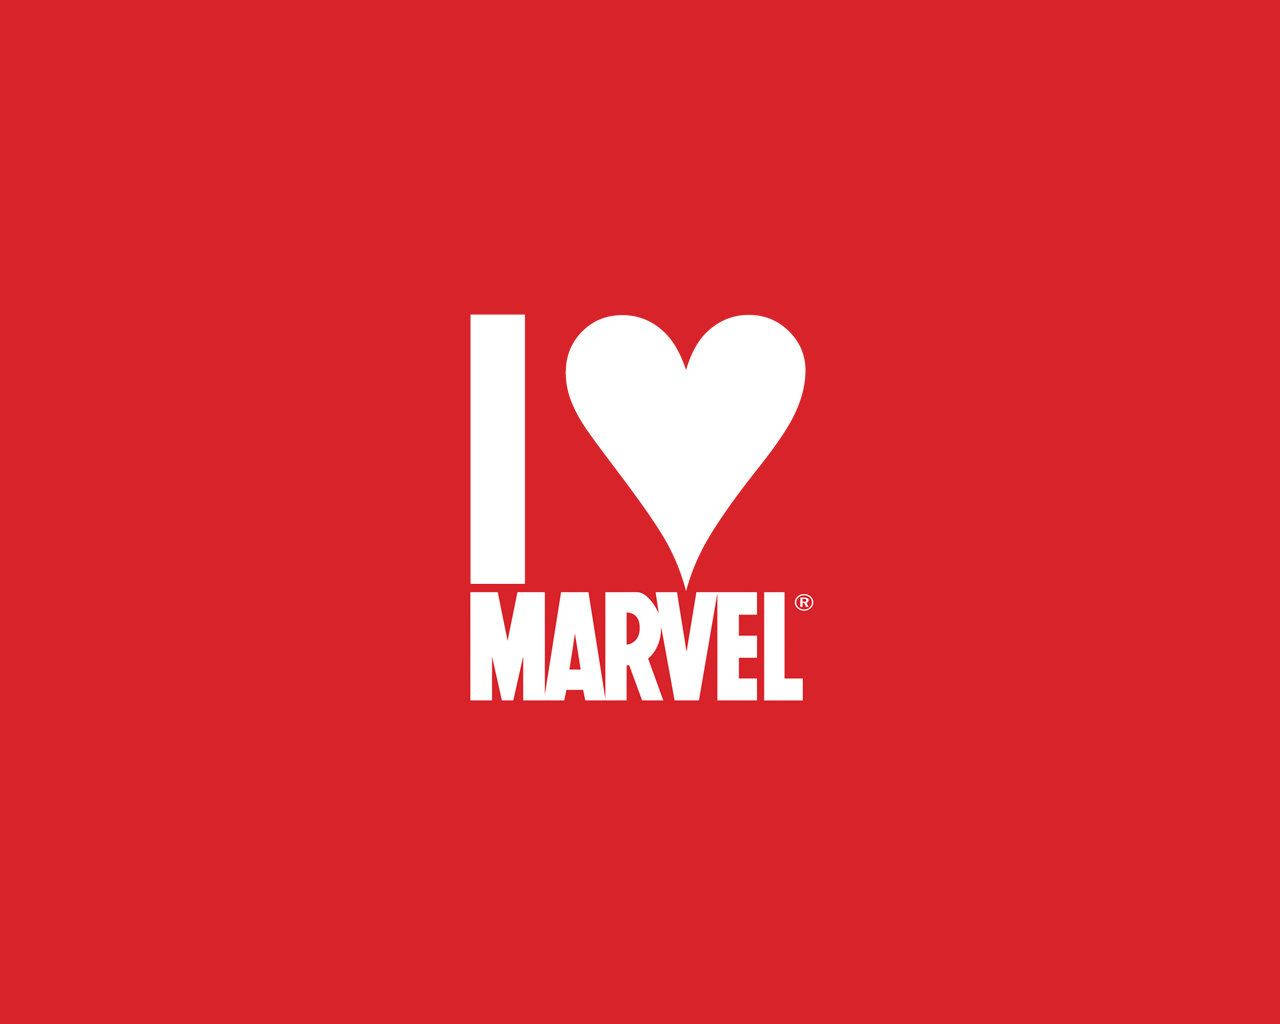 I love Marvel comics with big white heart in red background.